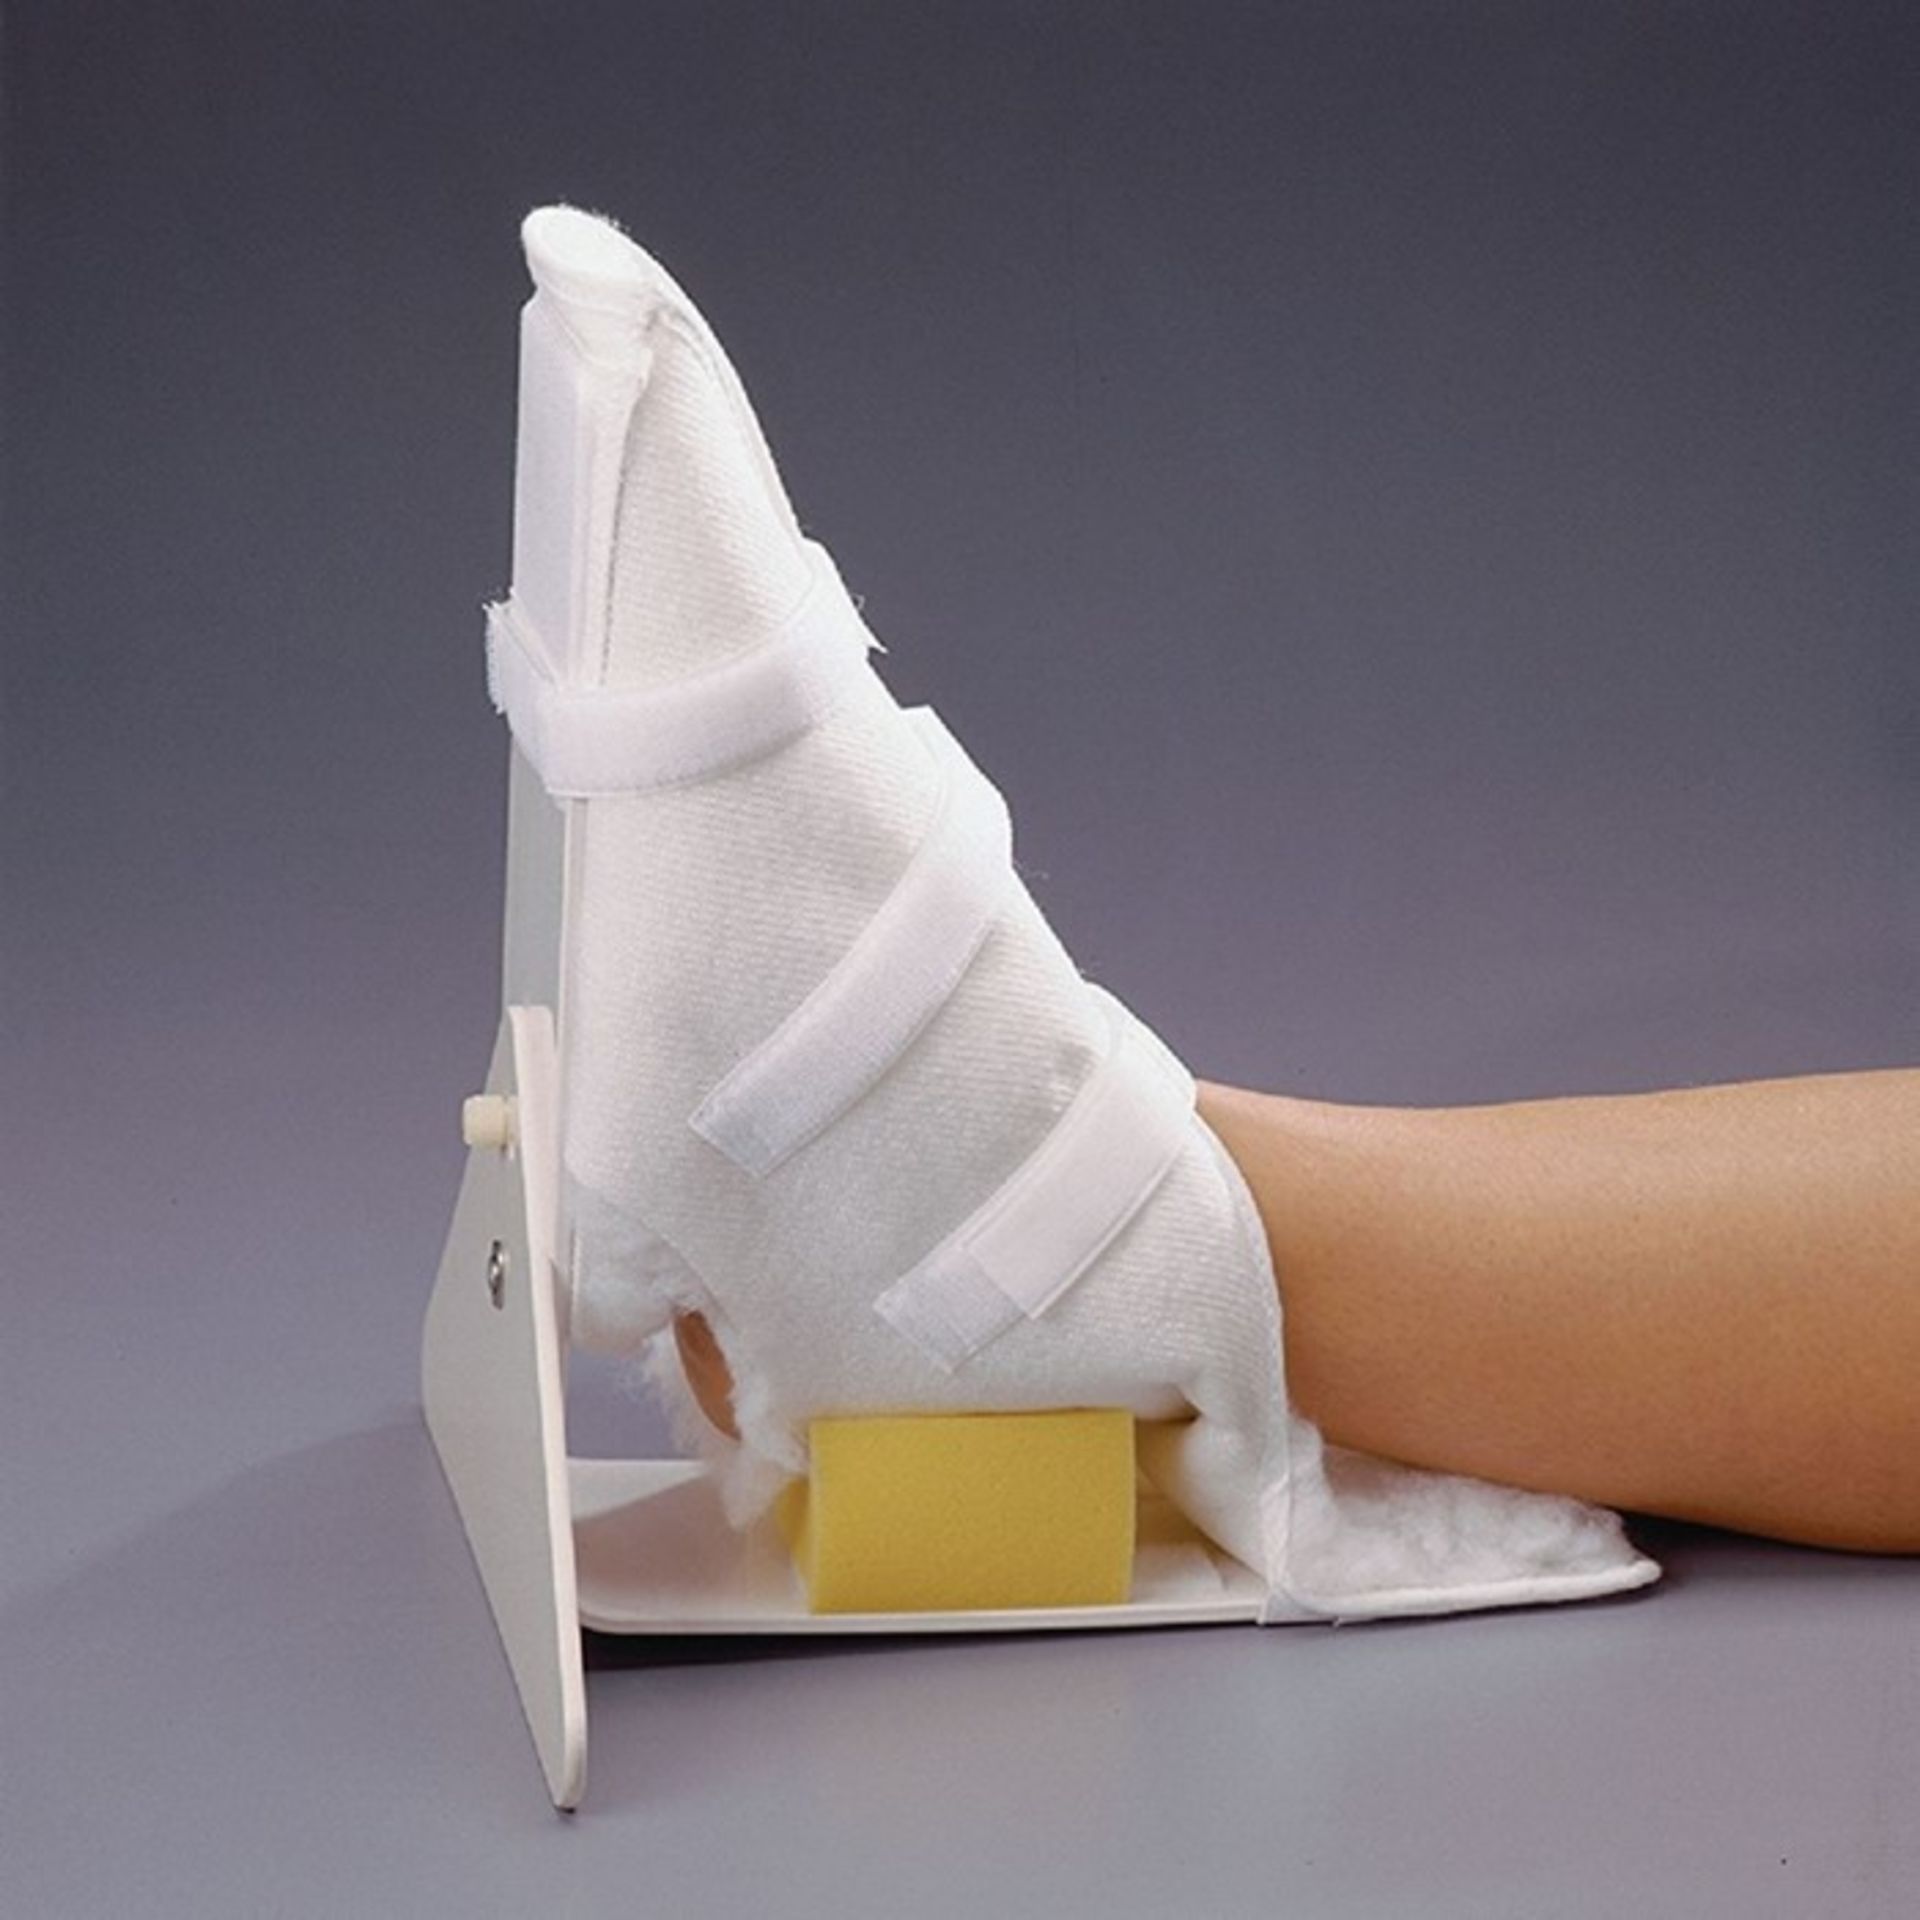 ME : 1 AS NEW BOXED ROLYAN BOOT FOOT ORTHOSIS - A200-1 / RRP £50.04 (VIEWING HIGHLY RECOMMENDED)